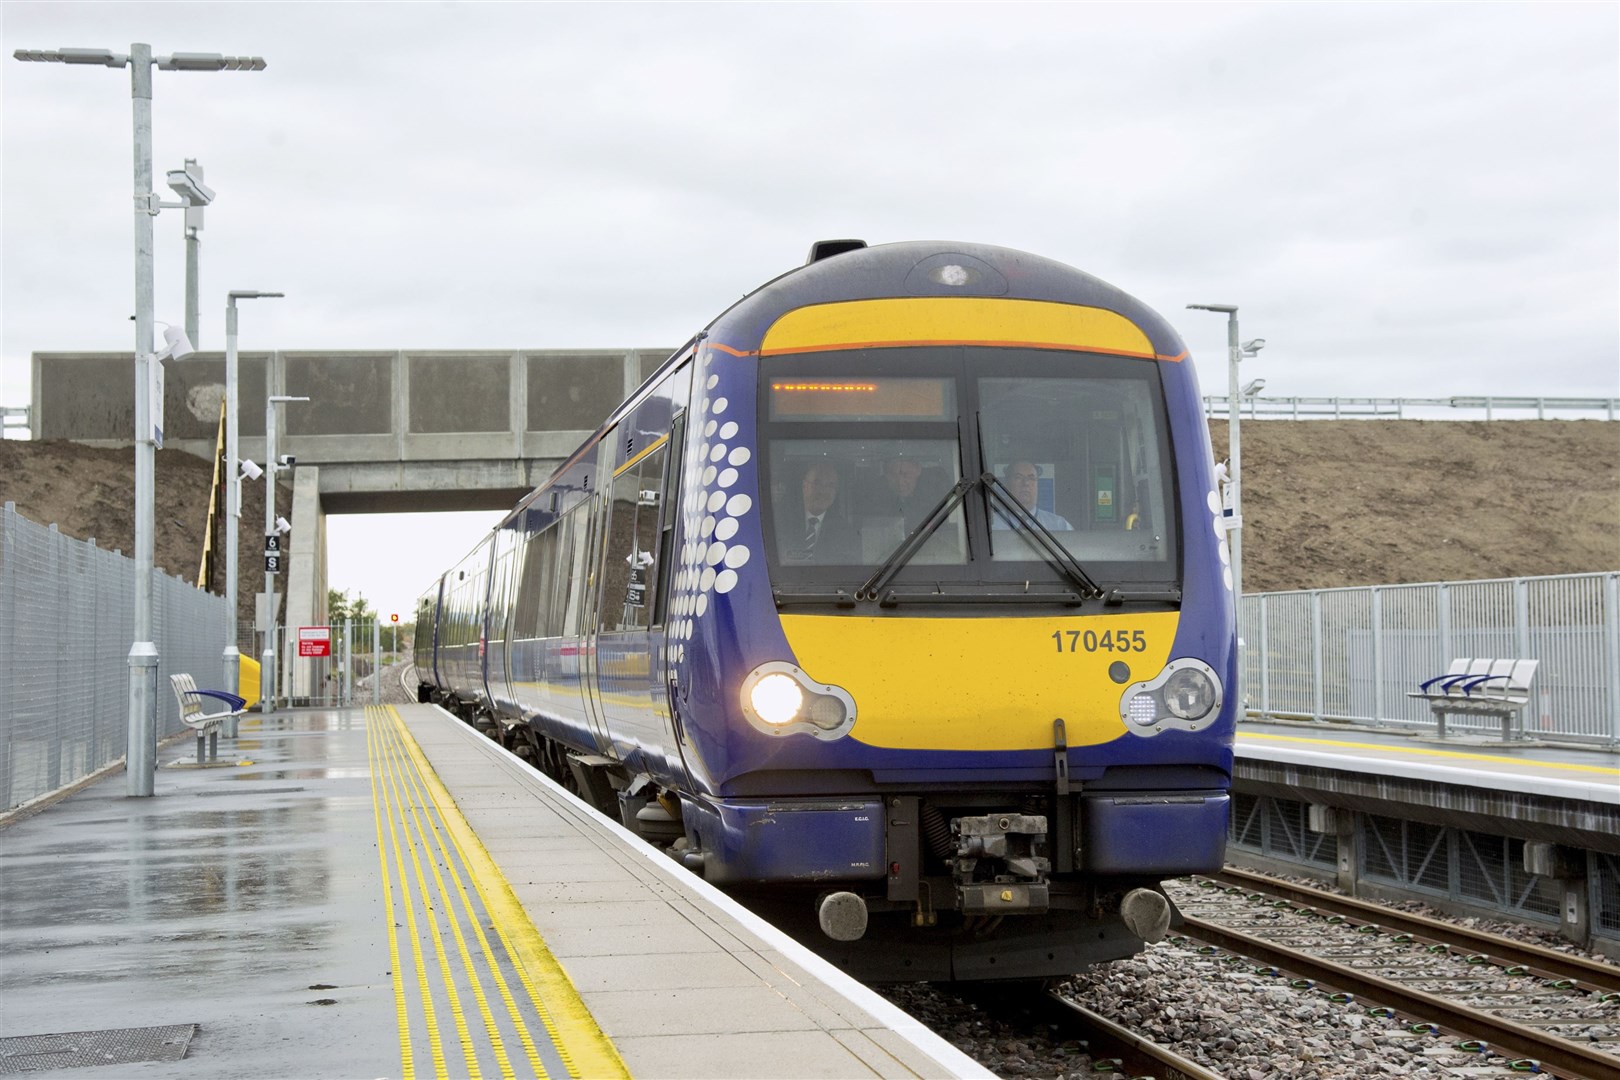 A ScotRail train pulls into a station (file image).